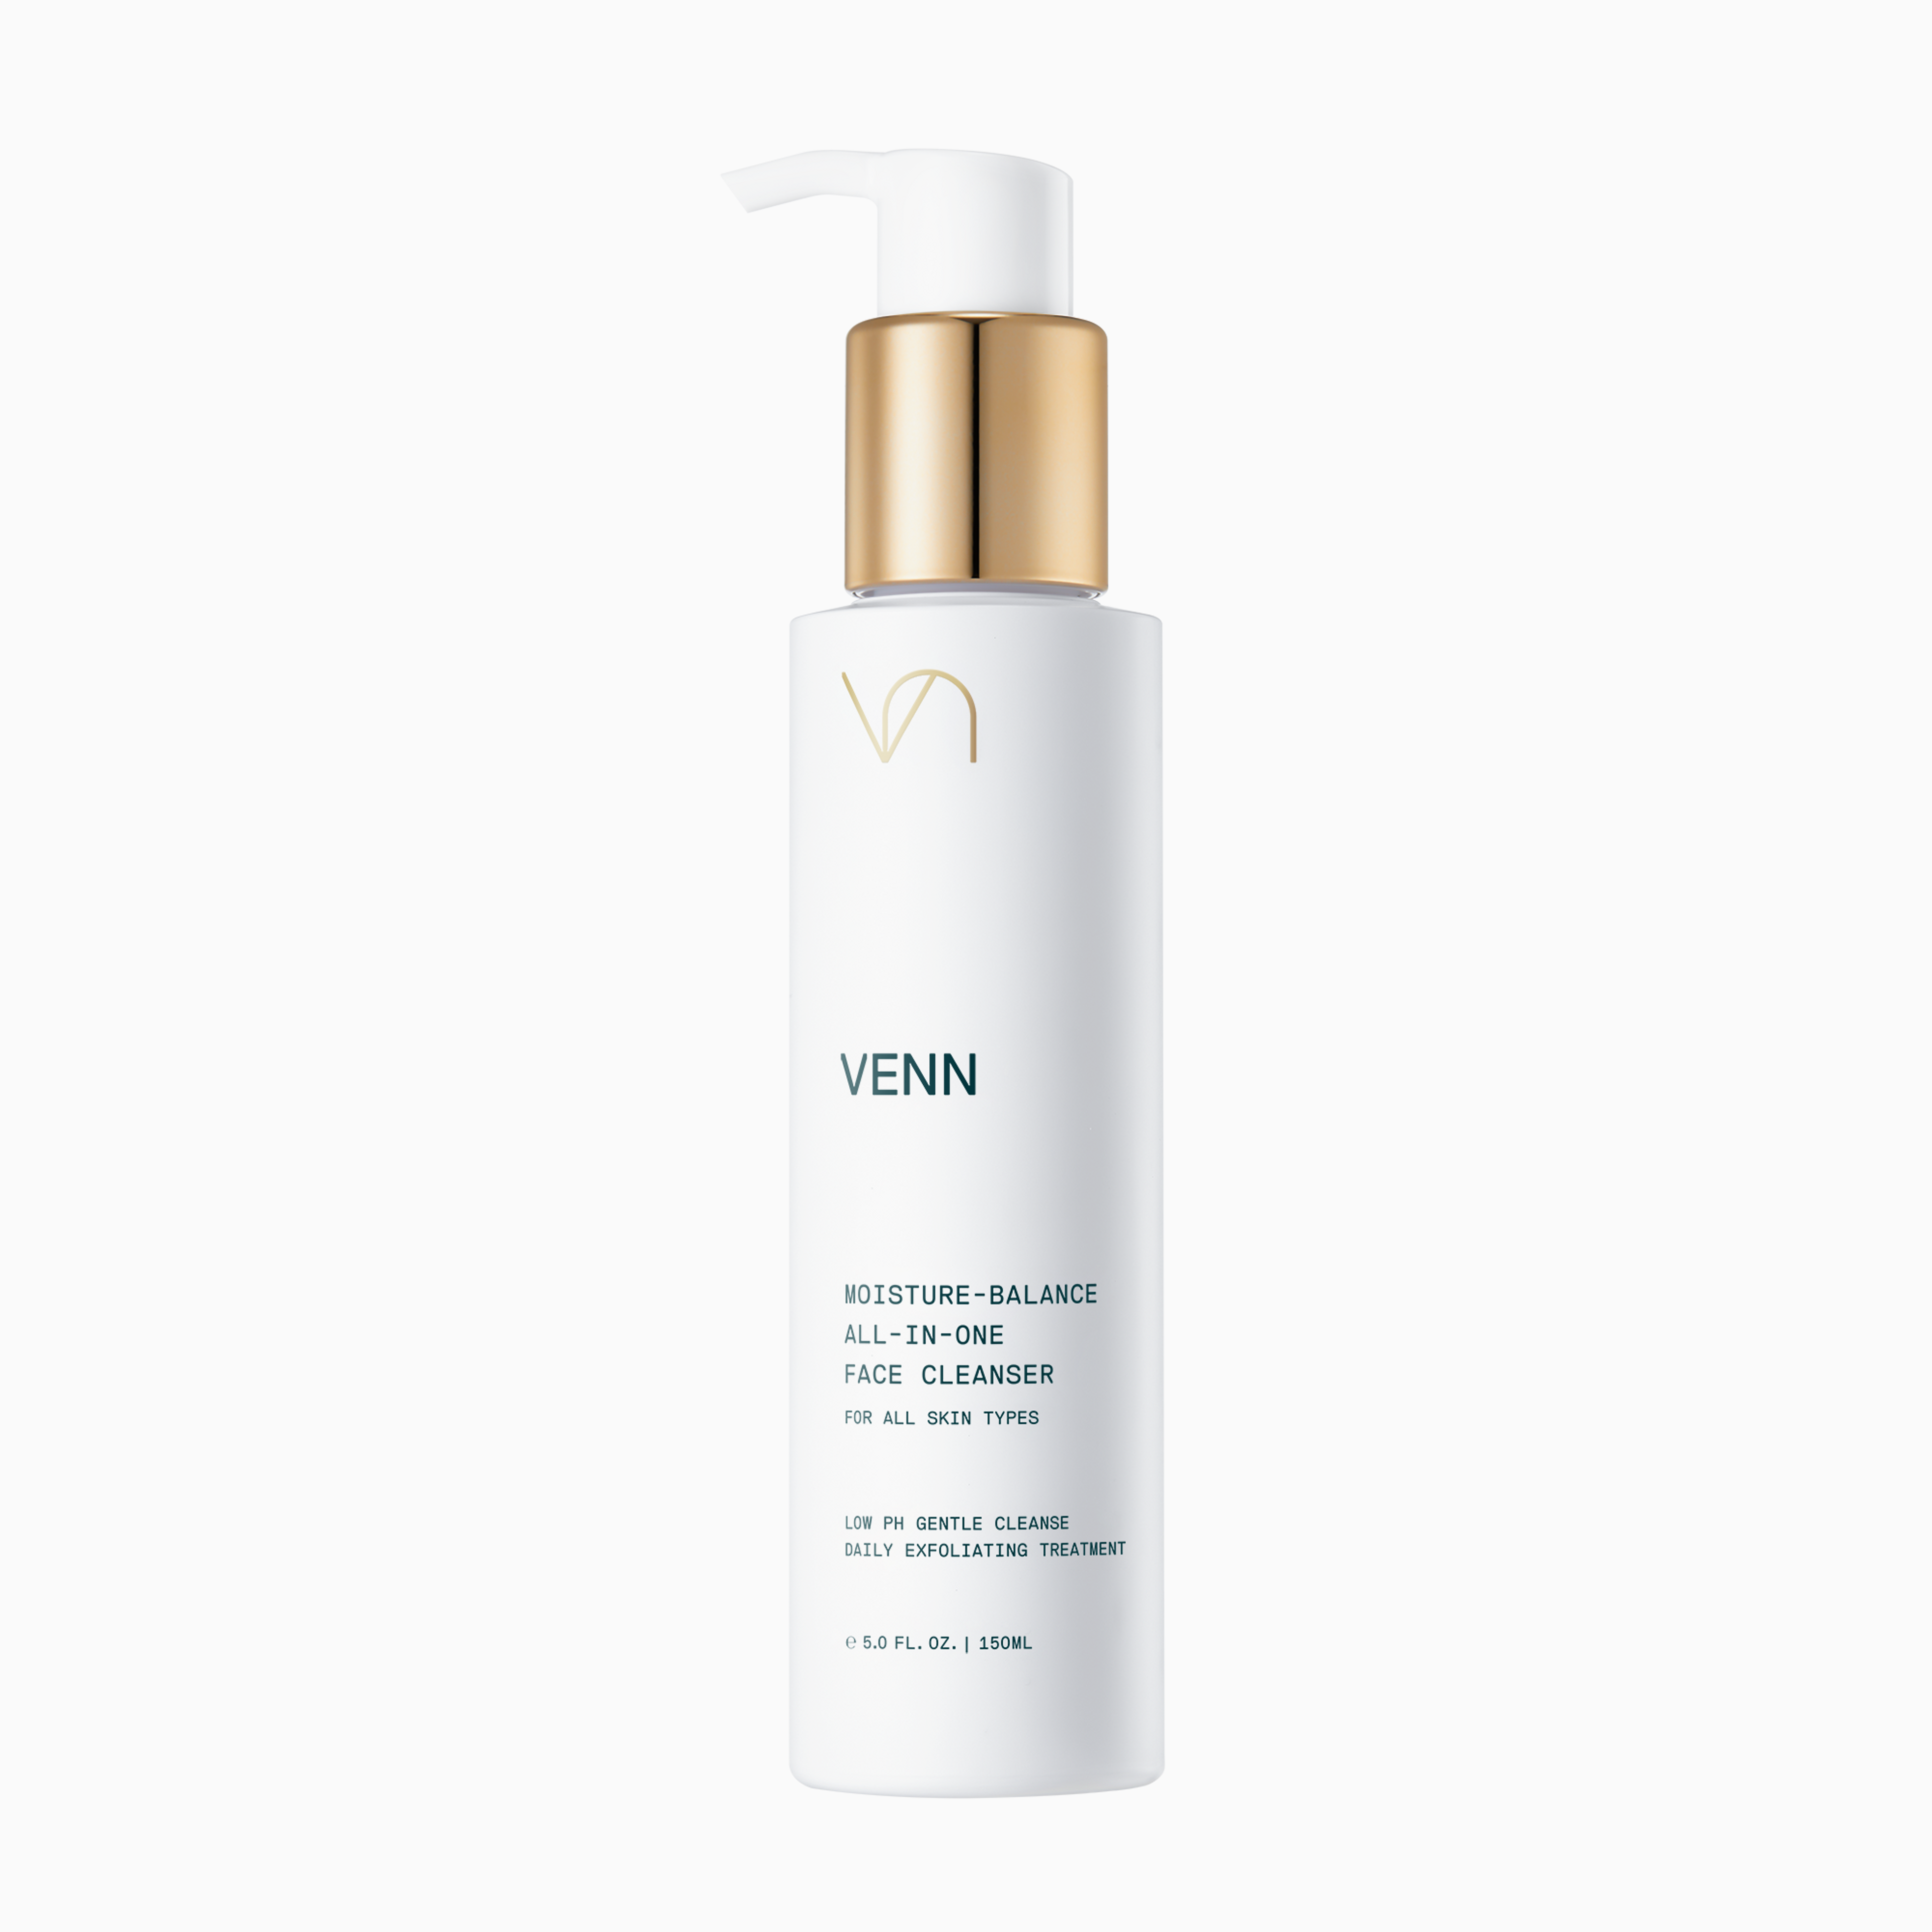 Moisture-Balance All-In-One Face Cleanser